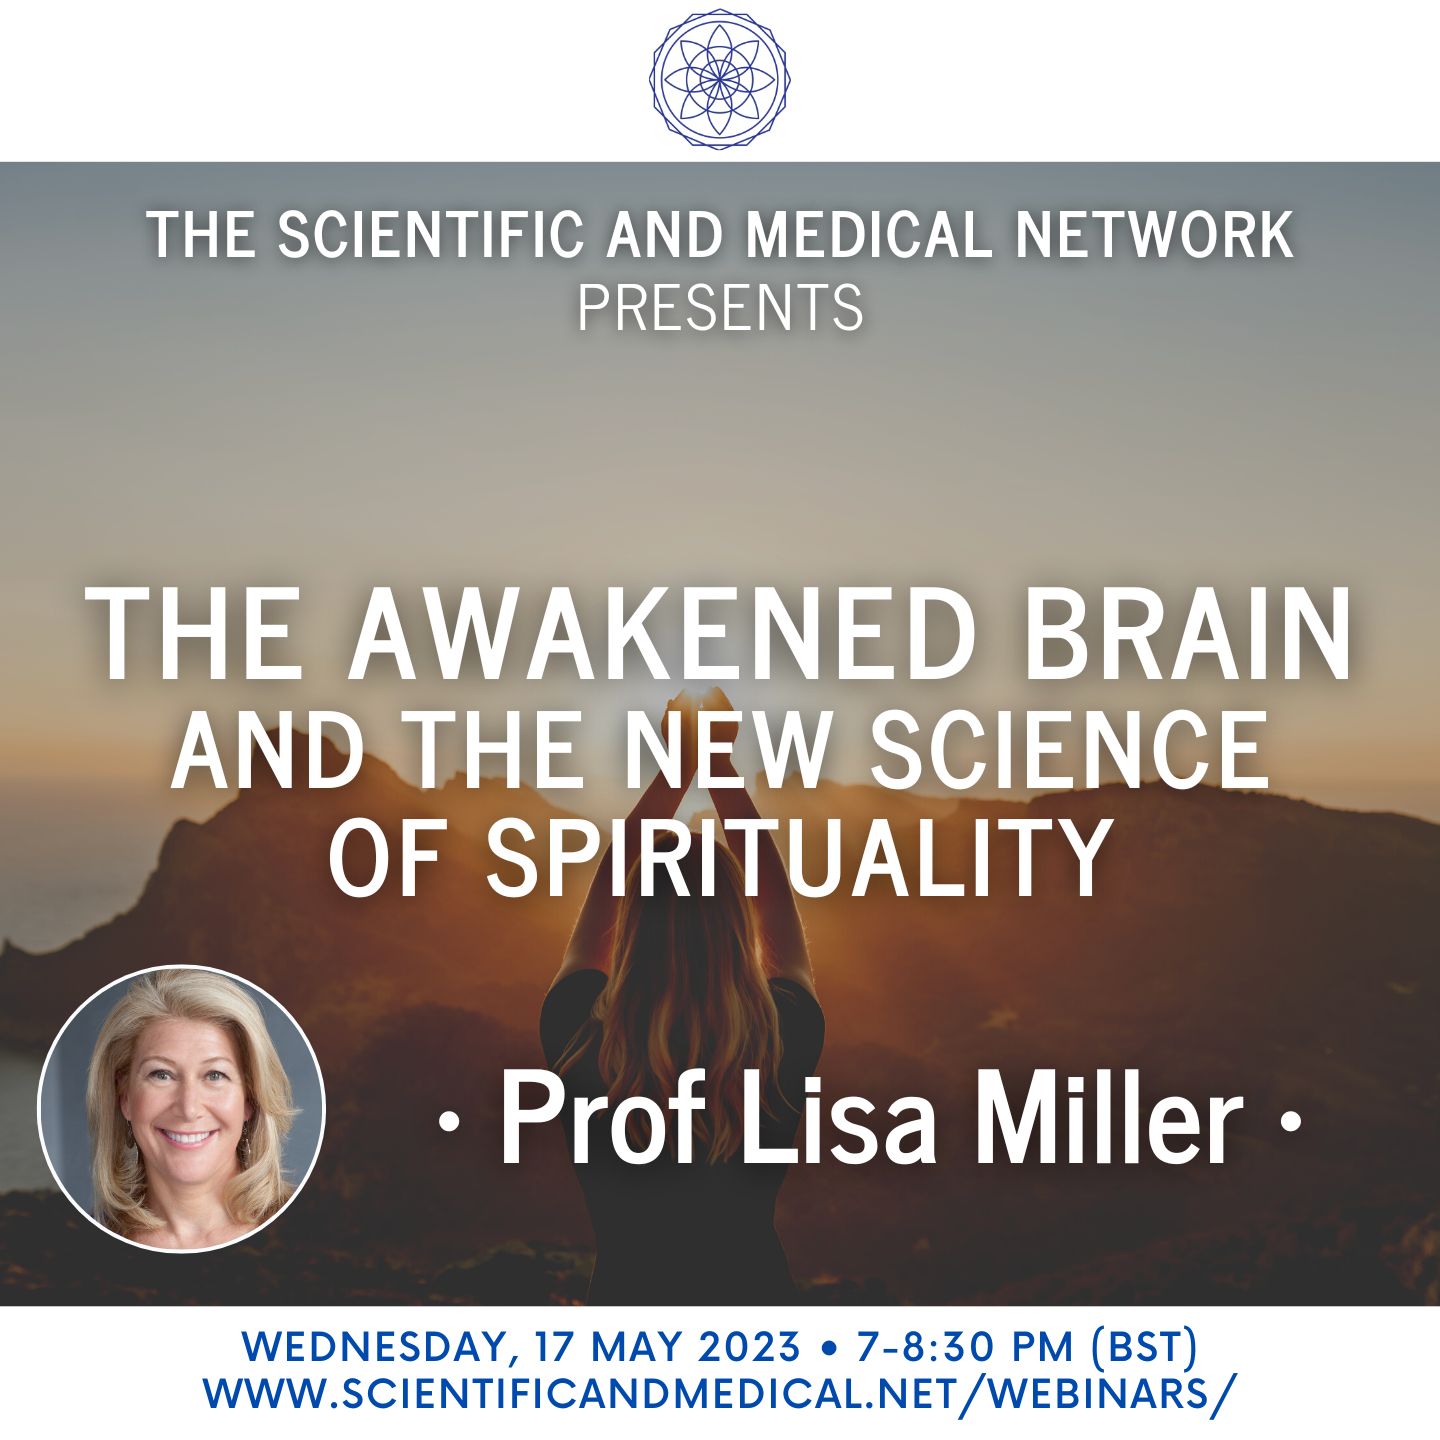 Prof Lisa Miller The Awakened Brain and the New Science of Spirituality